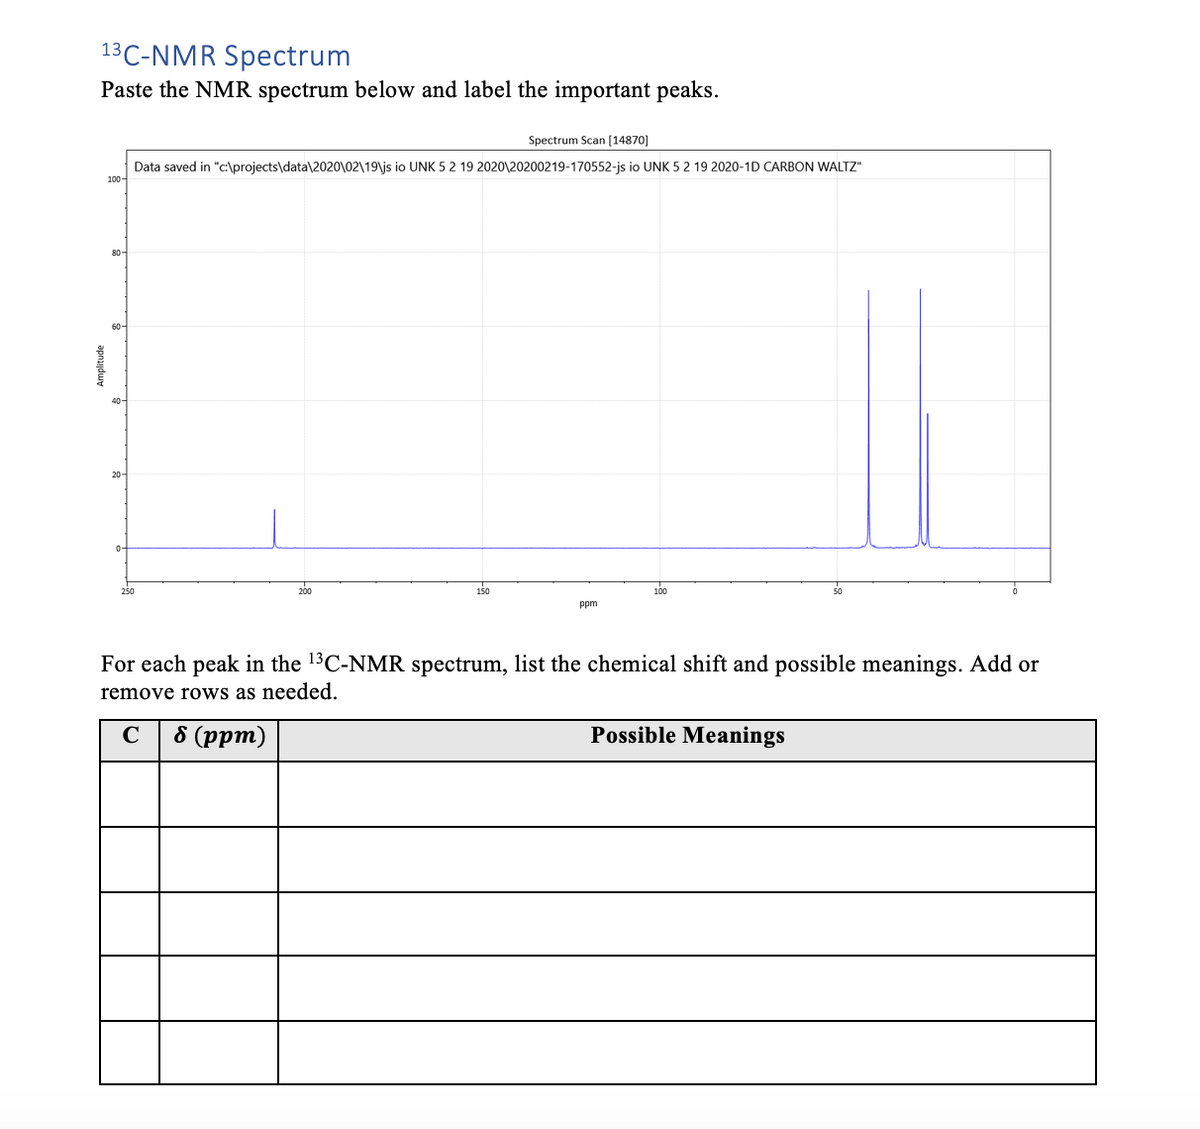 13C-NMR Spectrum
Paste the NMR spectrum below and label the important peaks.
Spectrum Scan [14870]
Data saved in "c:\projects\data\2020\02\19\js io UNK 5 2 19 2020\20200219-170552-js io UNK 5 2 19 2020-1D CARBON WALTZ"
100-
80-
60-
20-
200
150
100
ppm
For each peak in the 13C-NMR spectrum, list the chemical shift and possible meanings. Add or
remove rows as needed.
C
8 (pрт)
Possible Meanings
